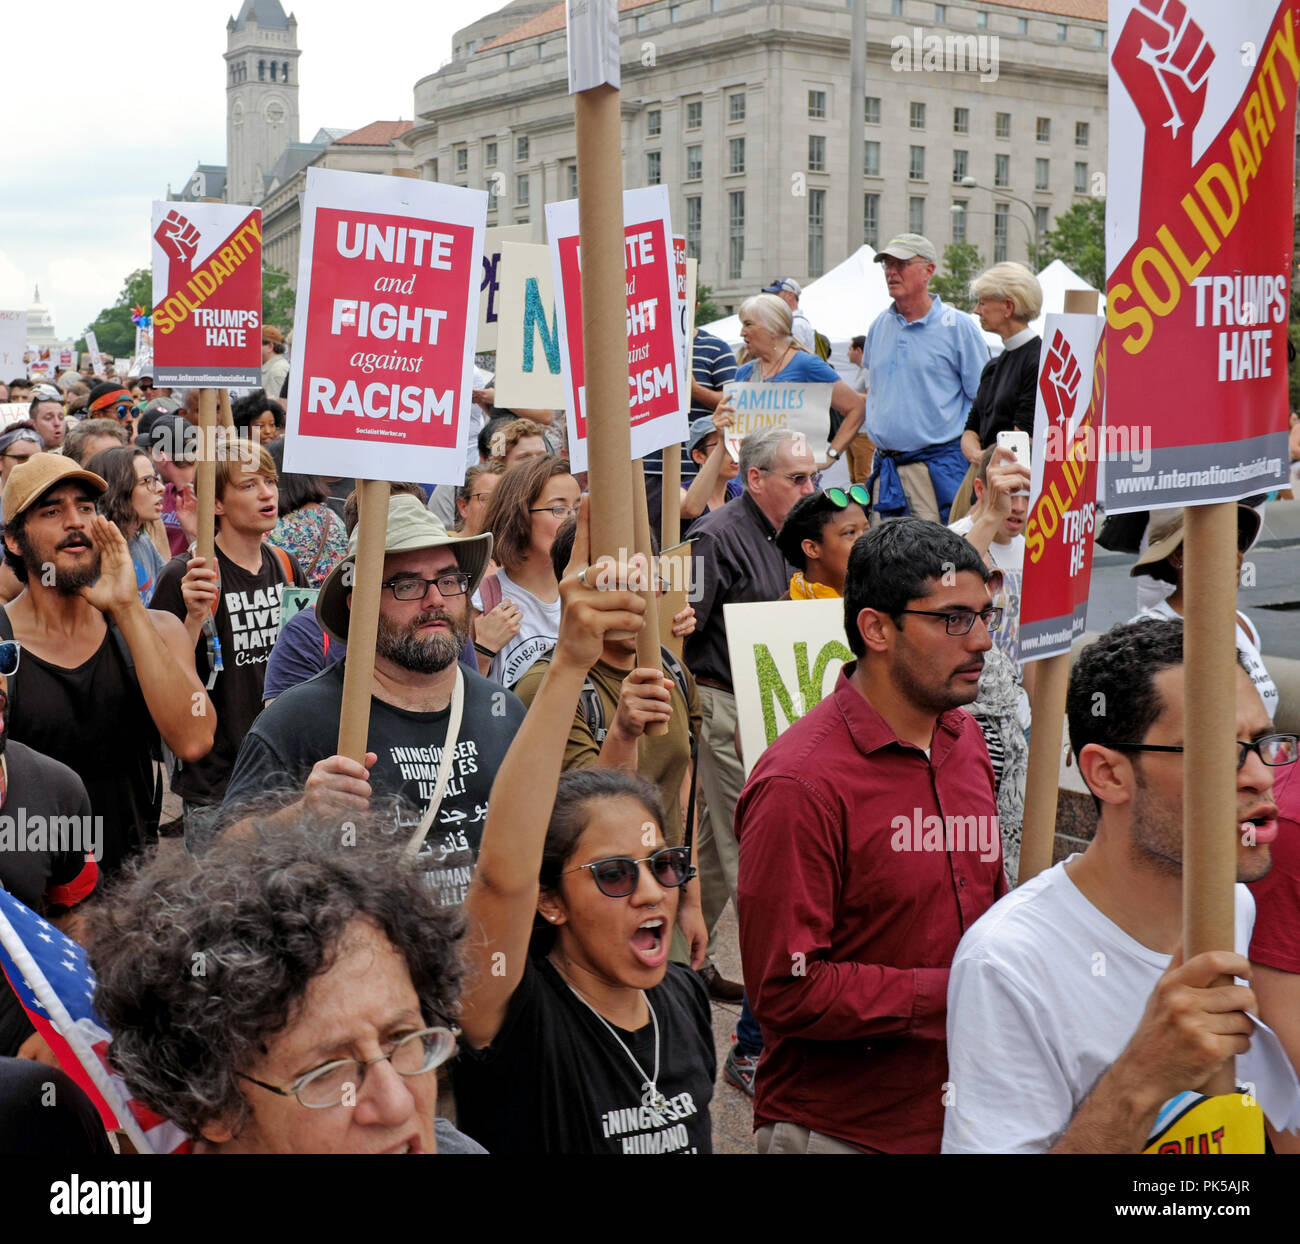 Protesters against hate and racism leave Freedom Square in Washington DC on August 12, 2018 to march to a nearby alt-right rally. Stock Photo